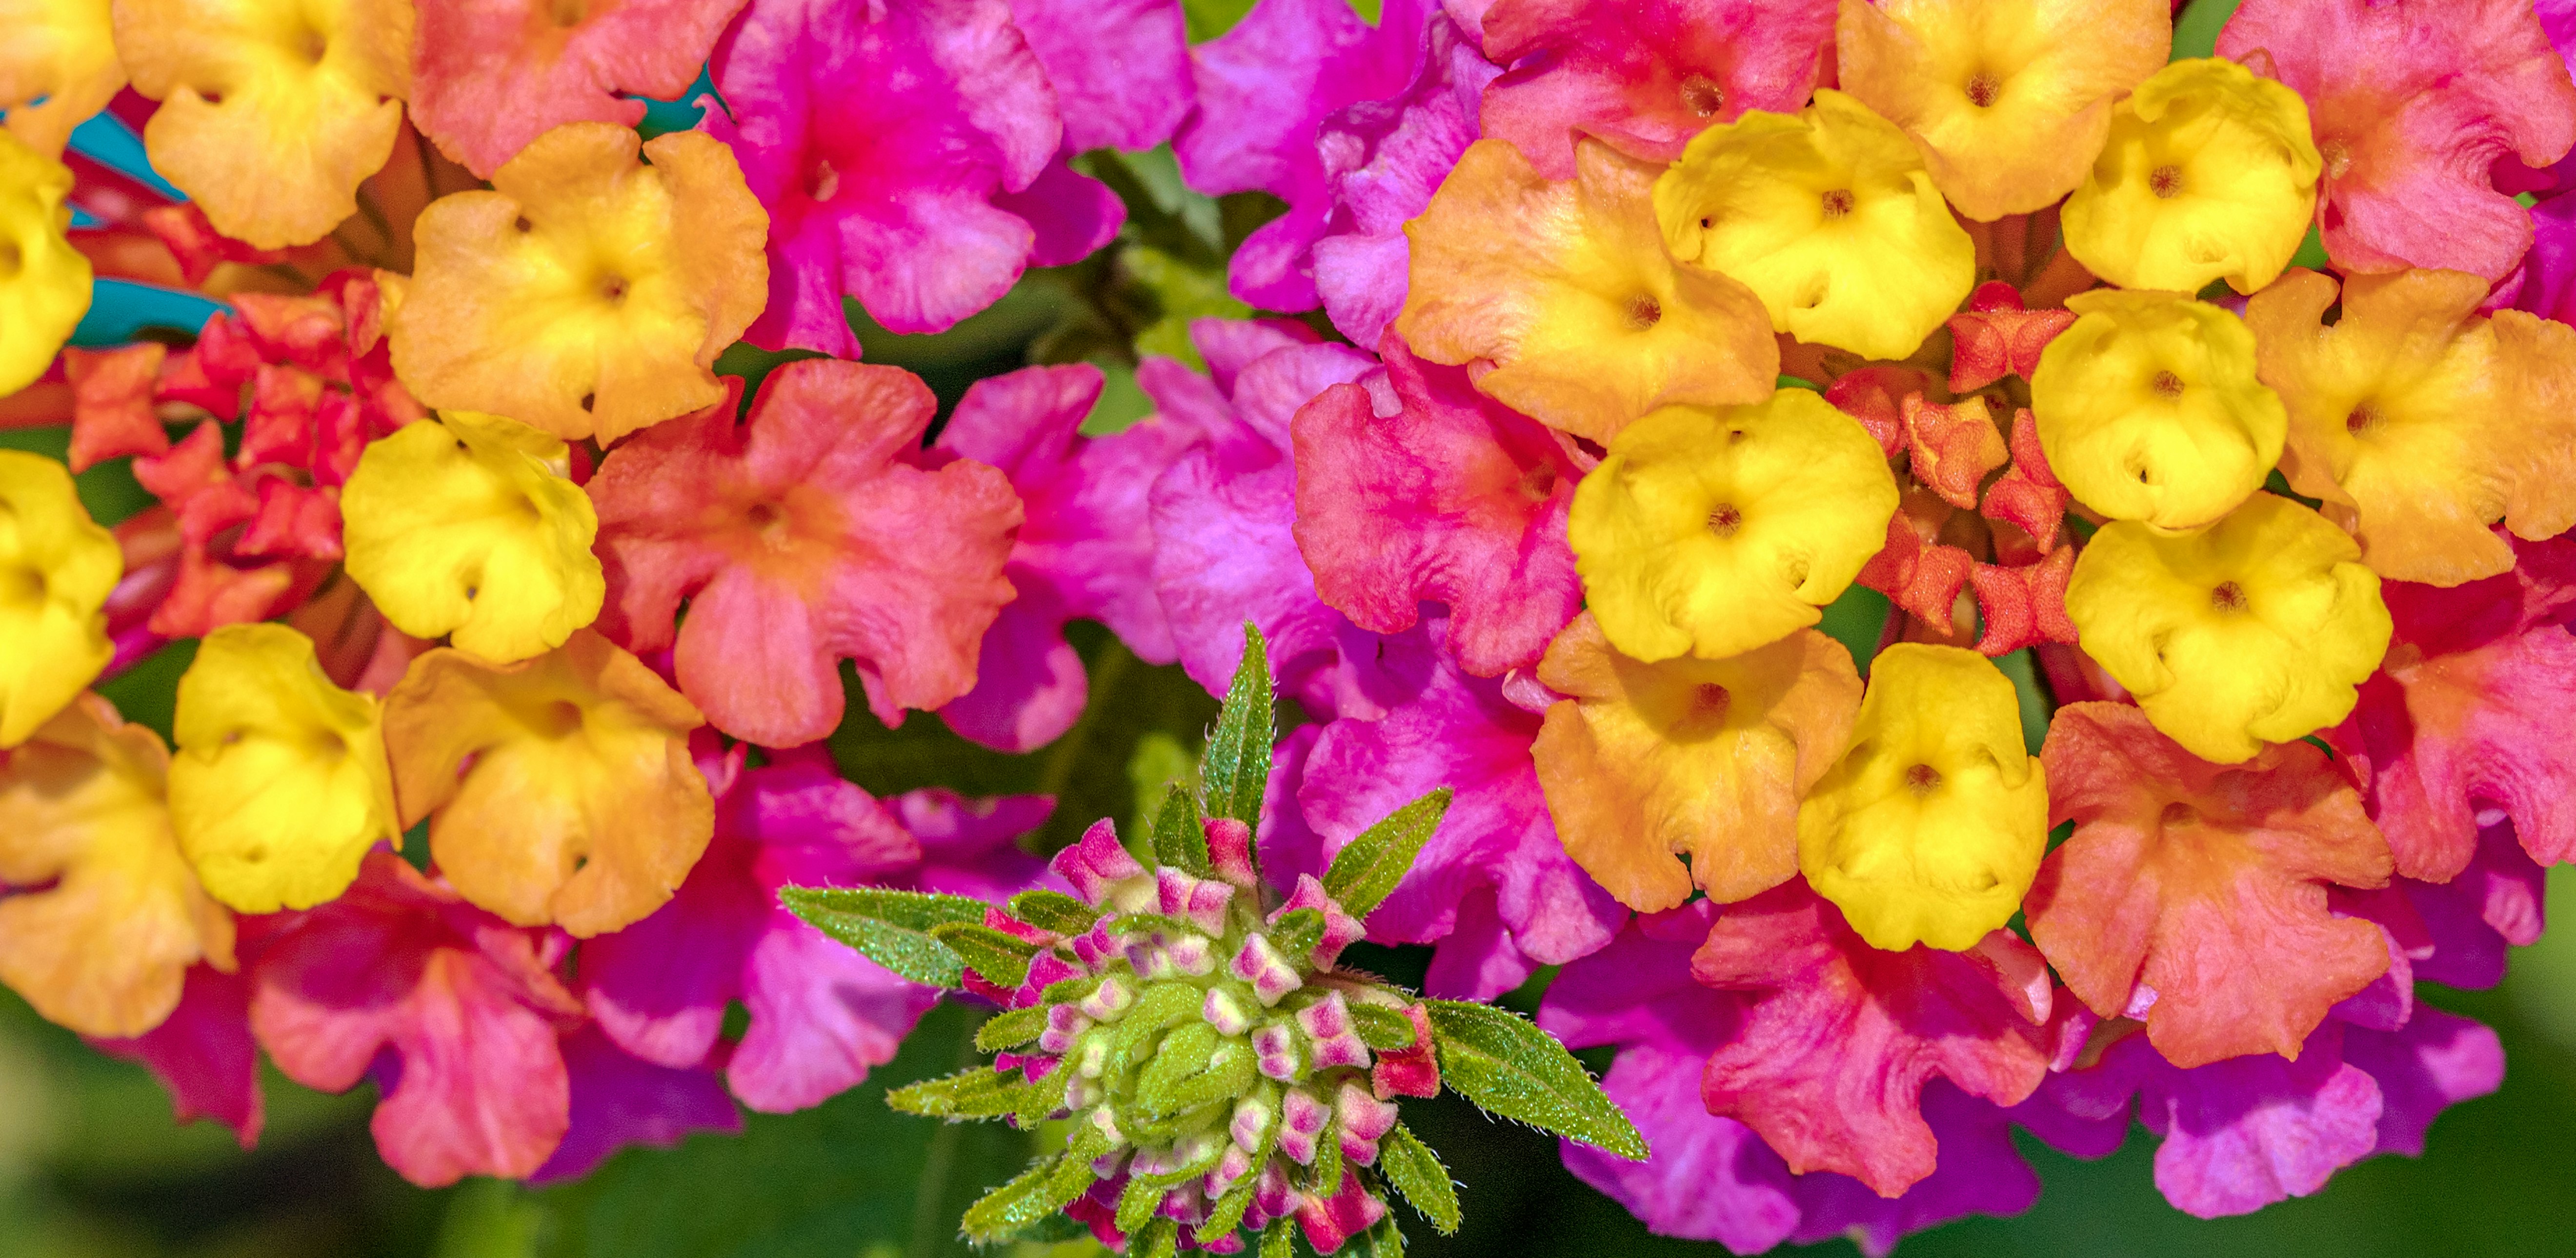 yellow and pink flowers with green leaves